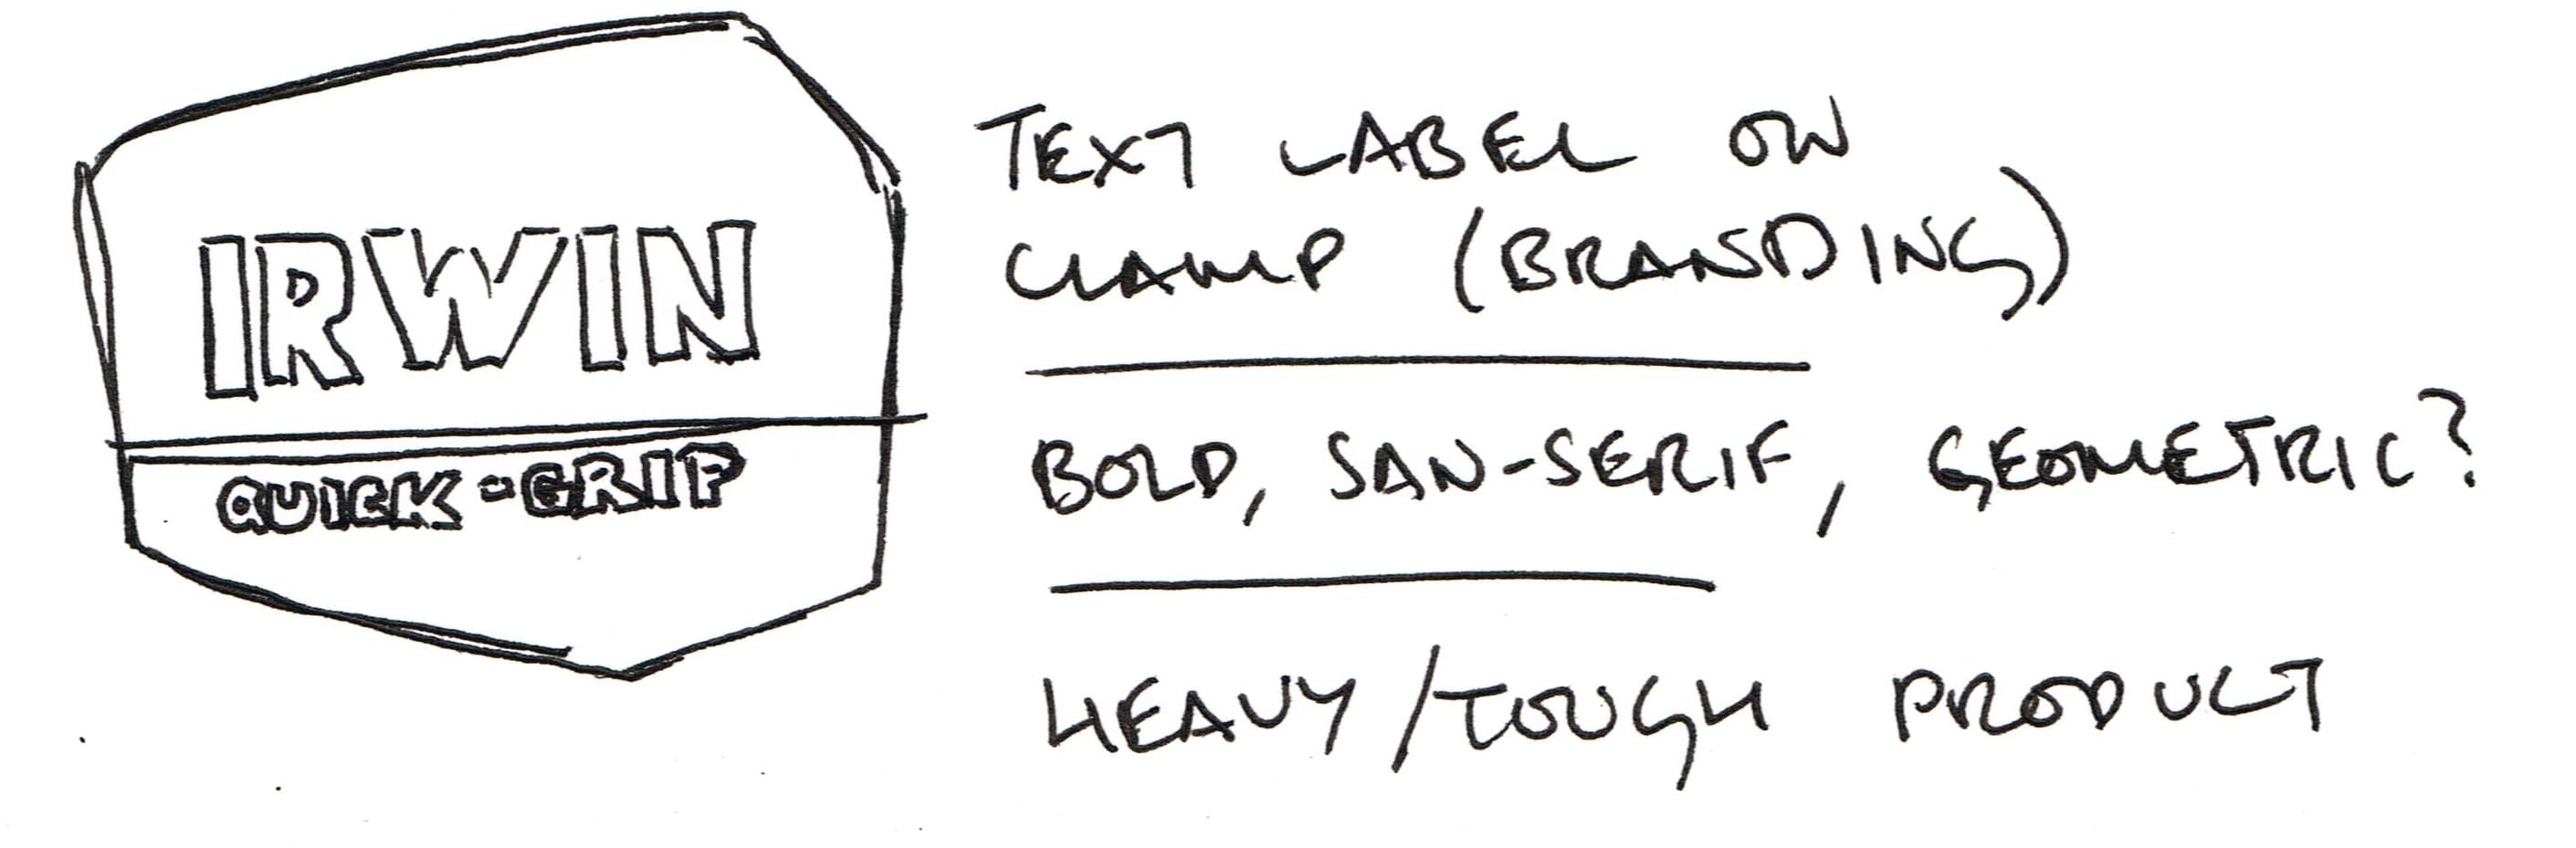 A sketch of branding from a clamp company, with some text indicating a likely classification and associations the font makes